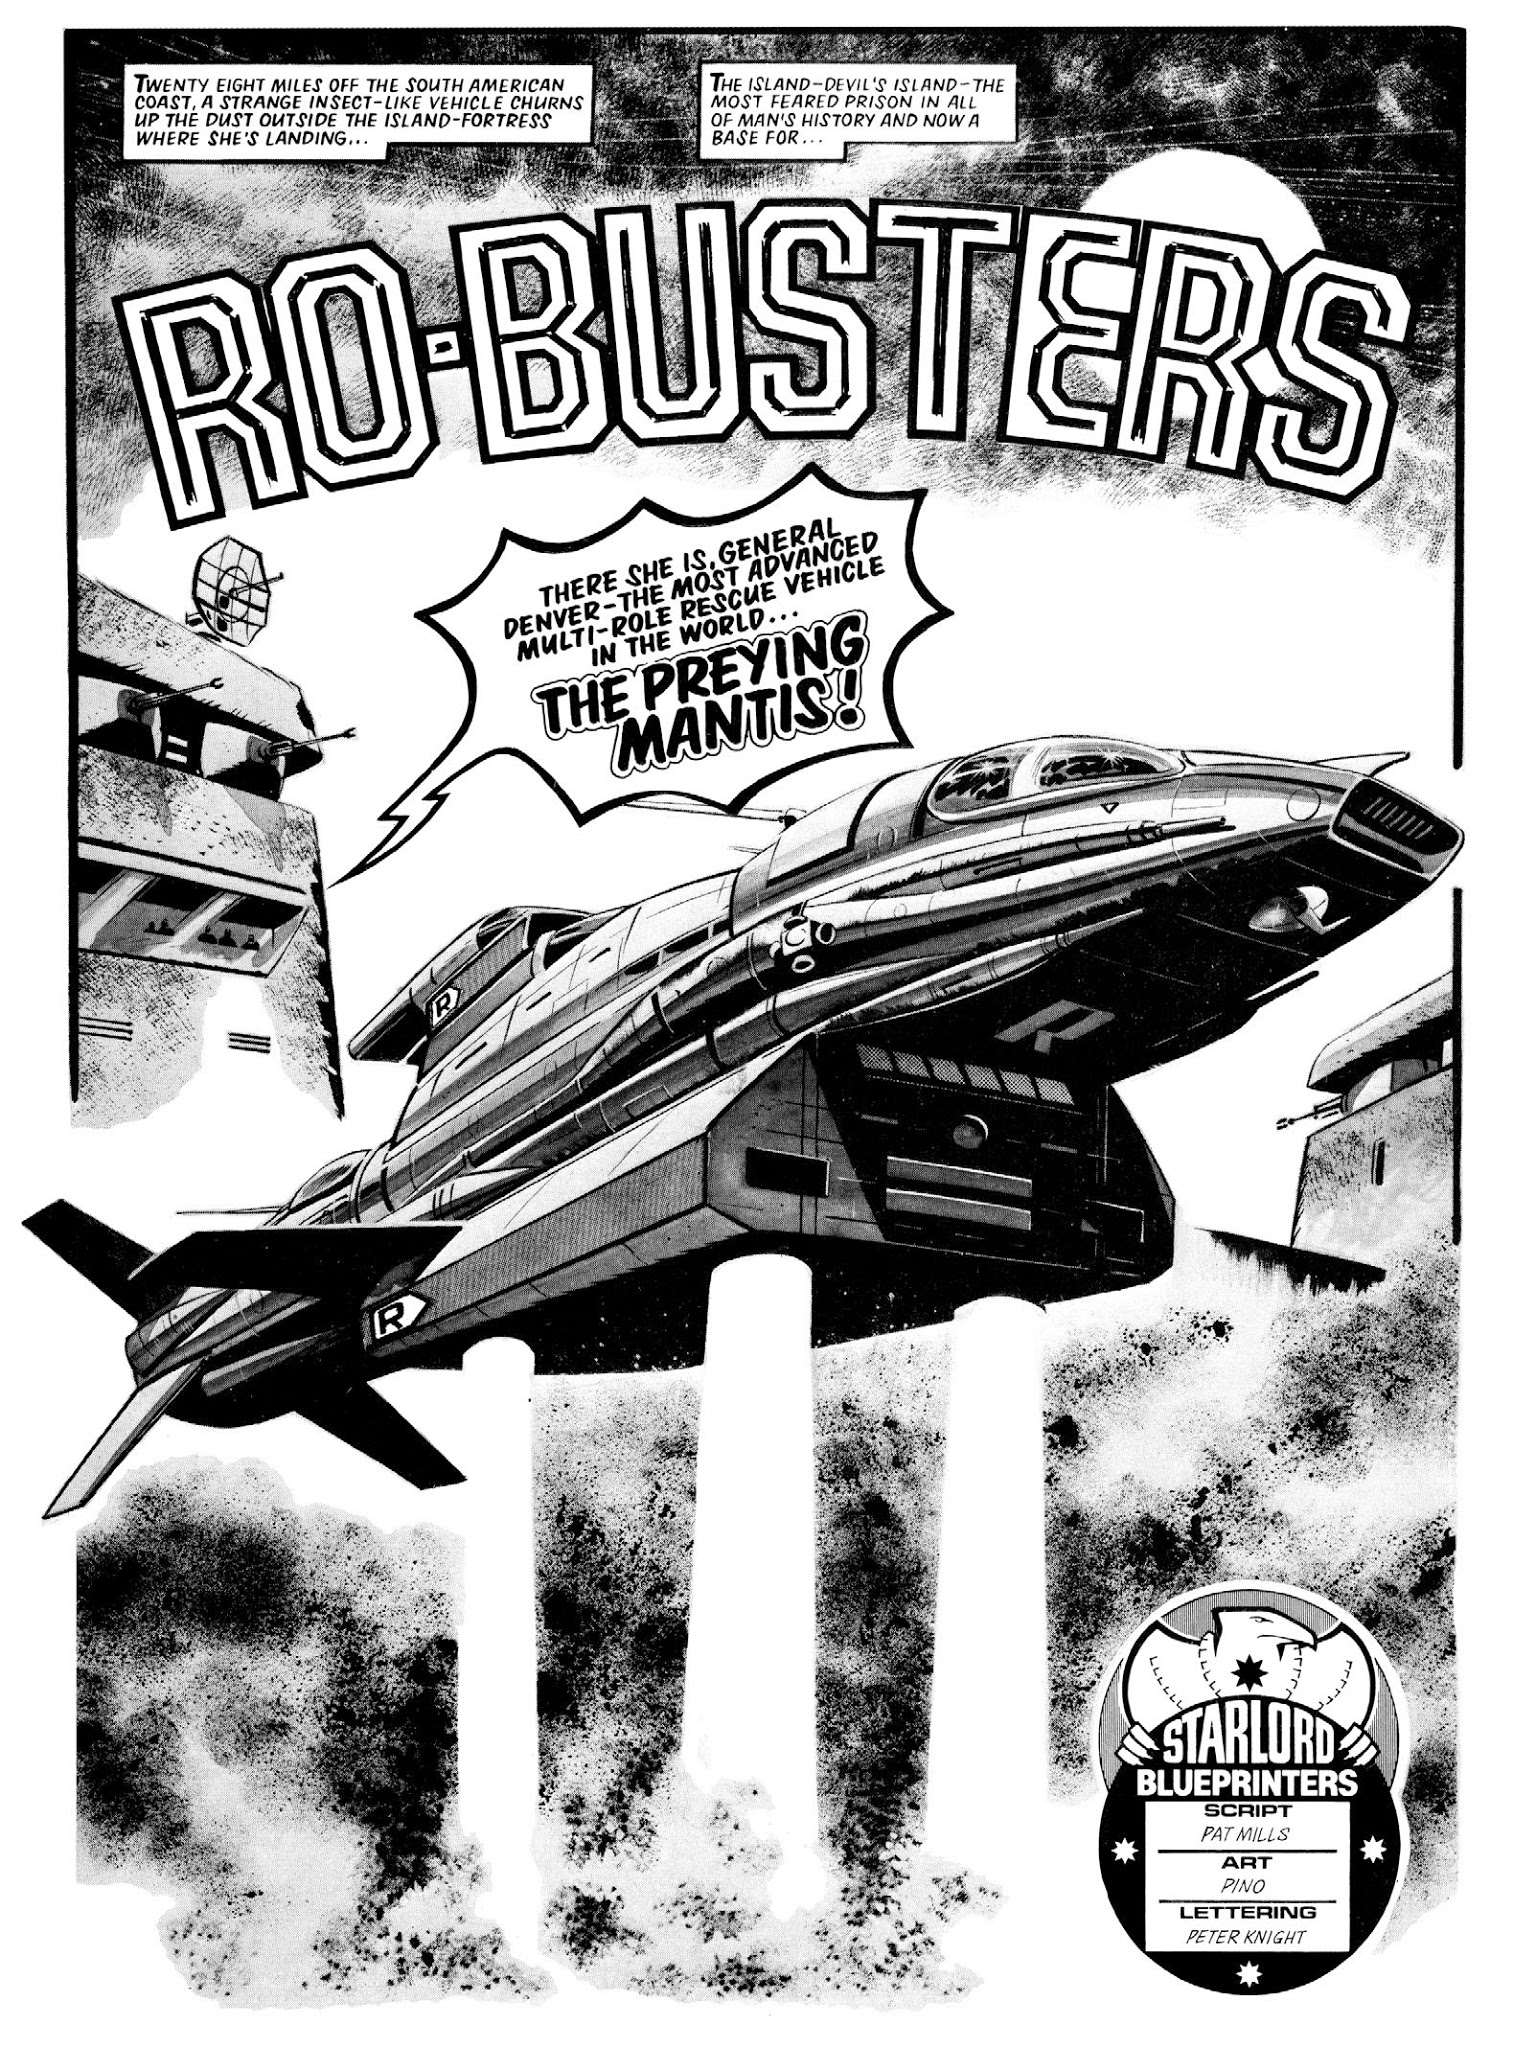 Read online Ro-Busters comic -  Issue # TPB 1 - 16